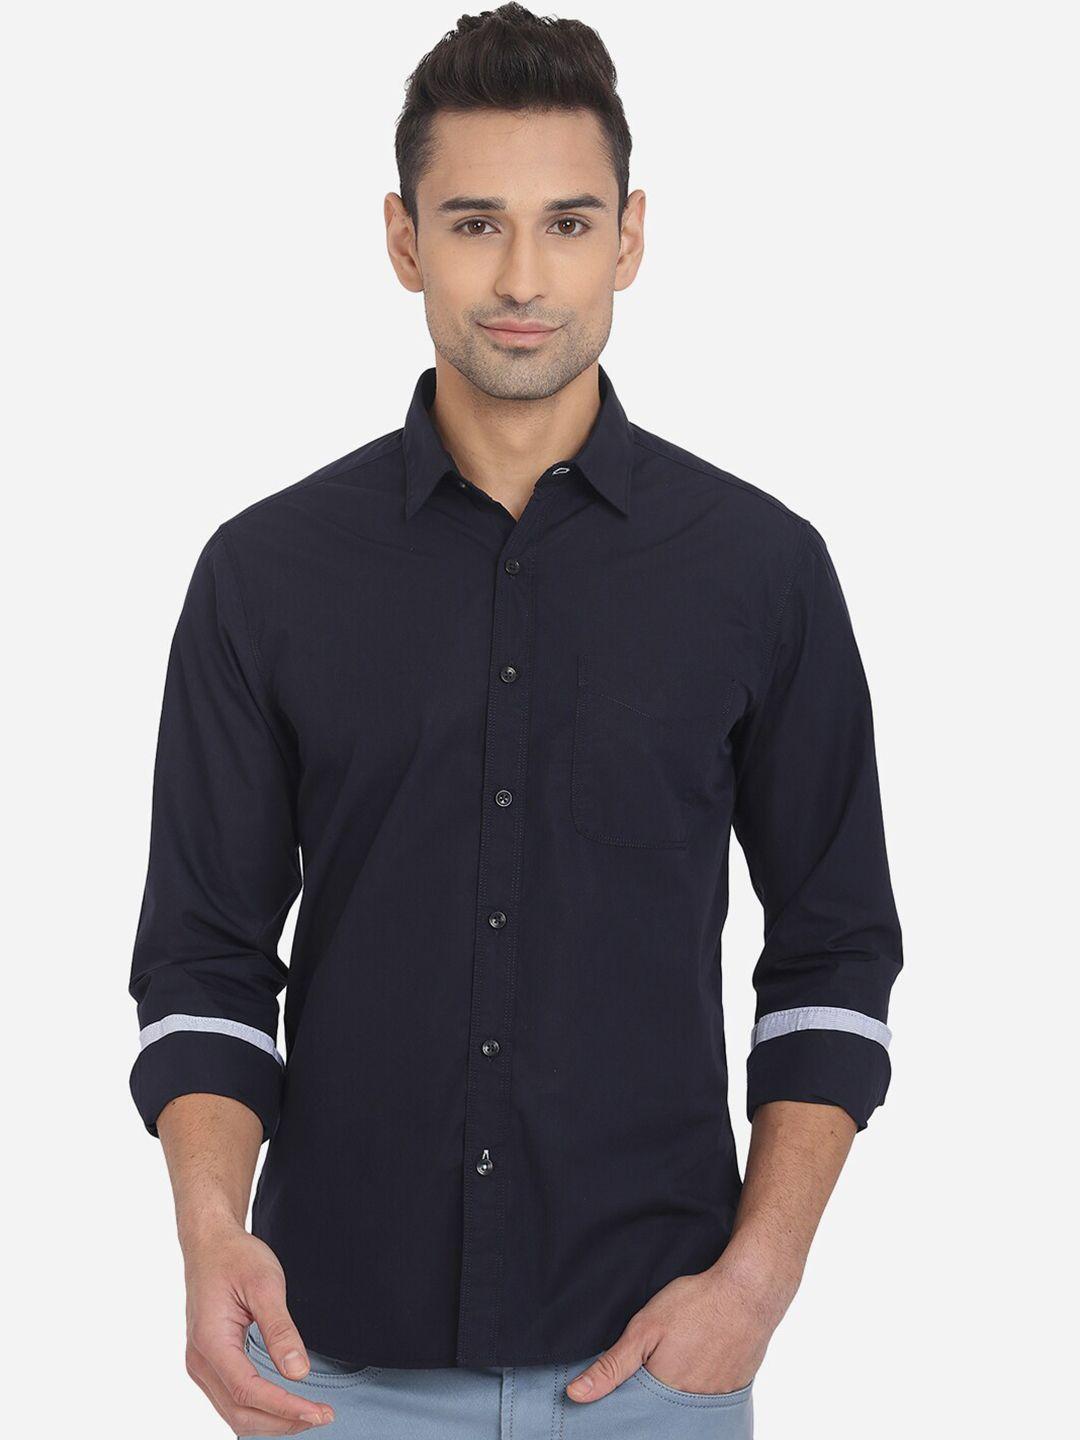 greenfibre-men-blue-solid-slim-fit-pure-cotton-casual-shirt